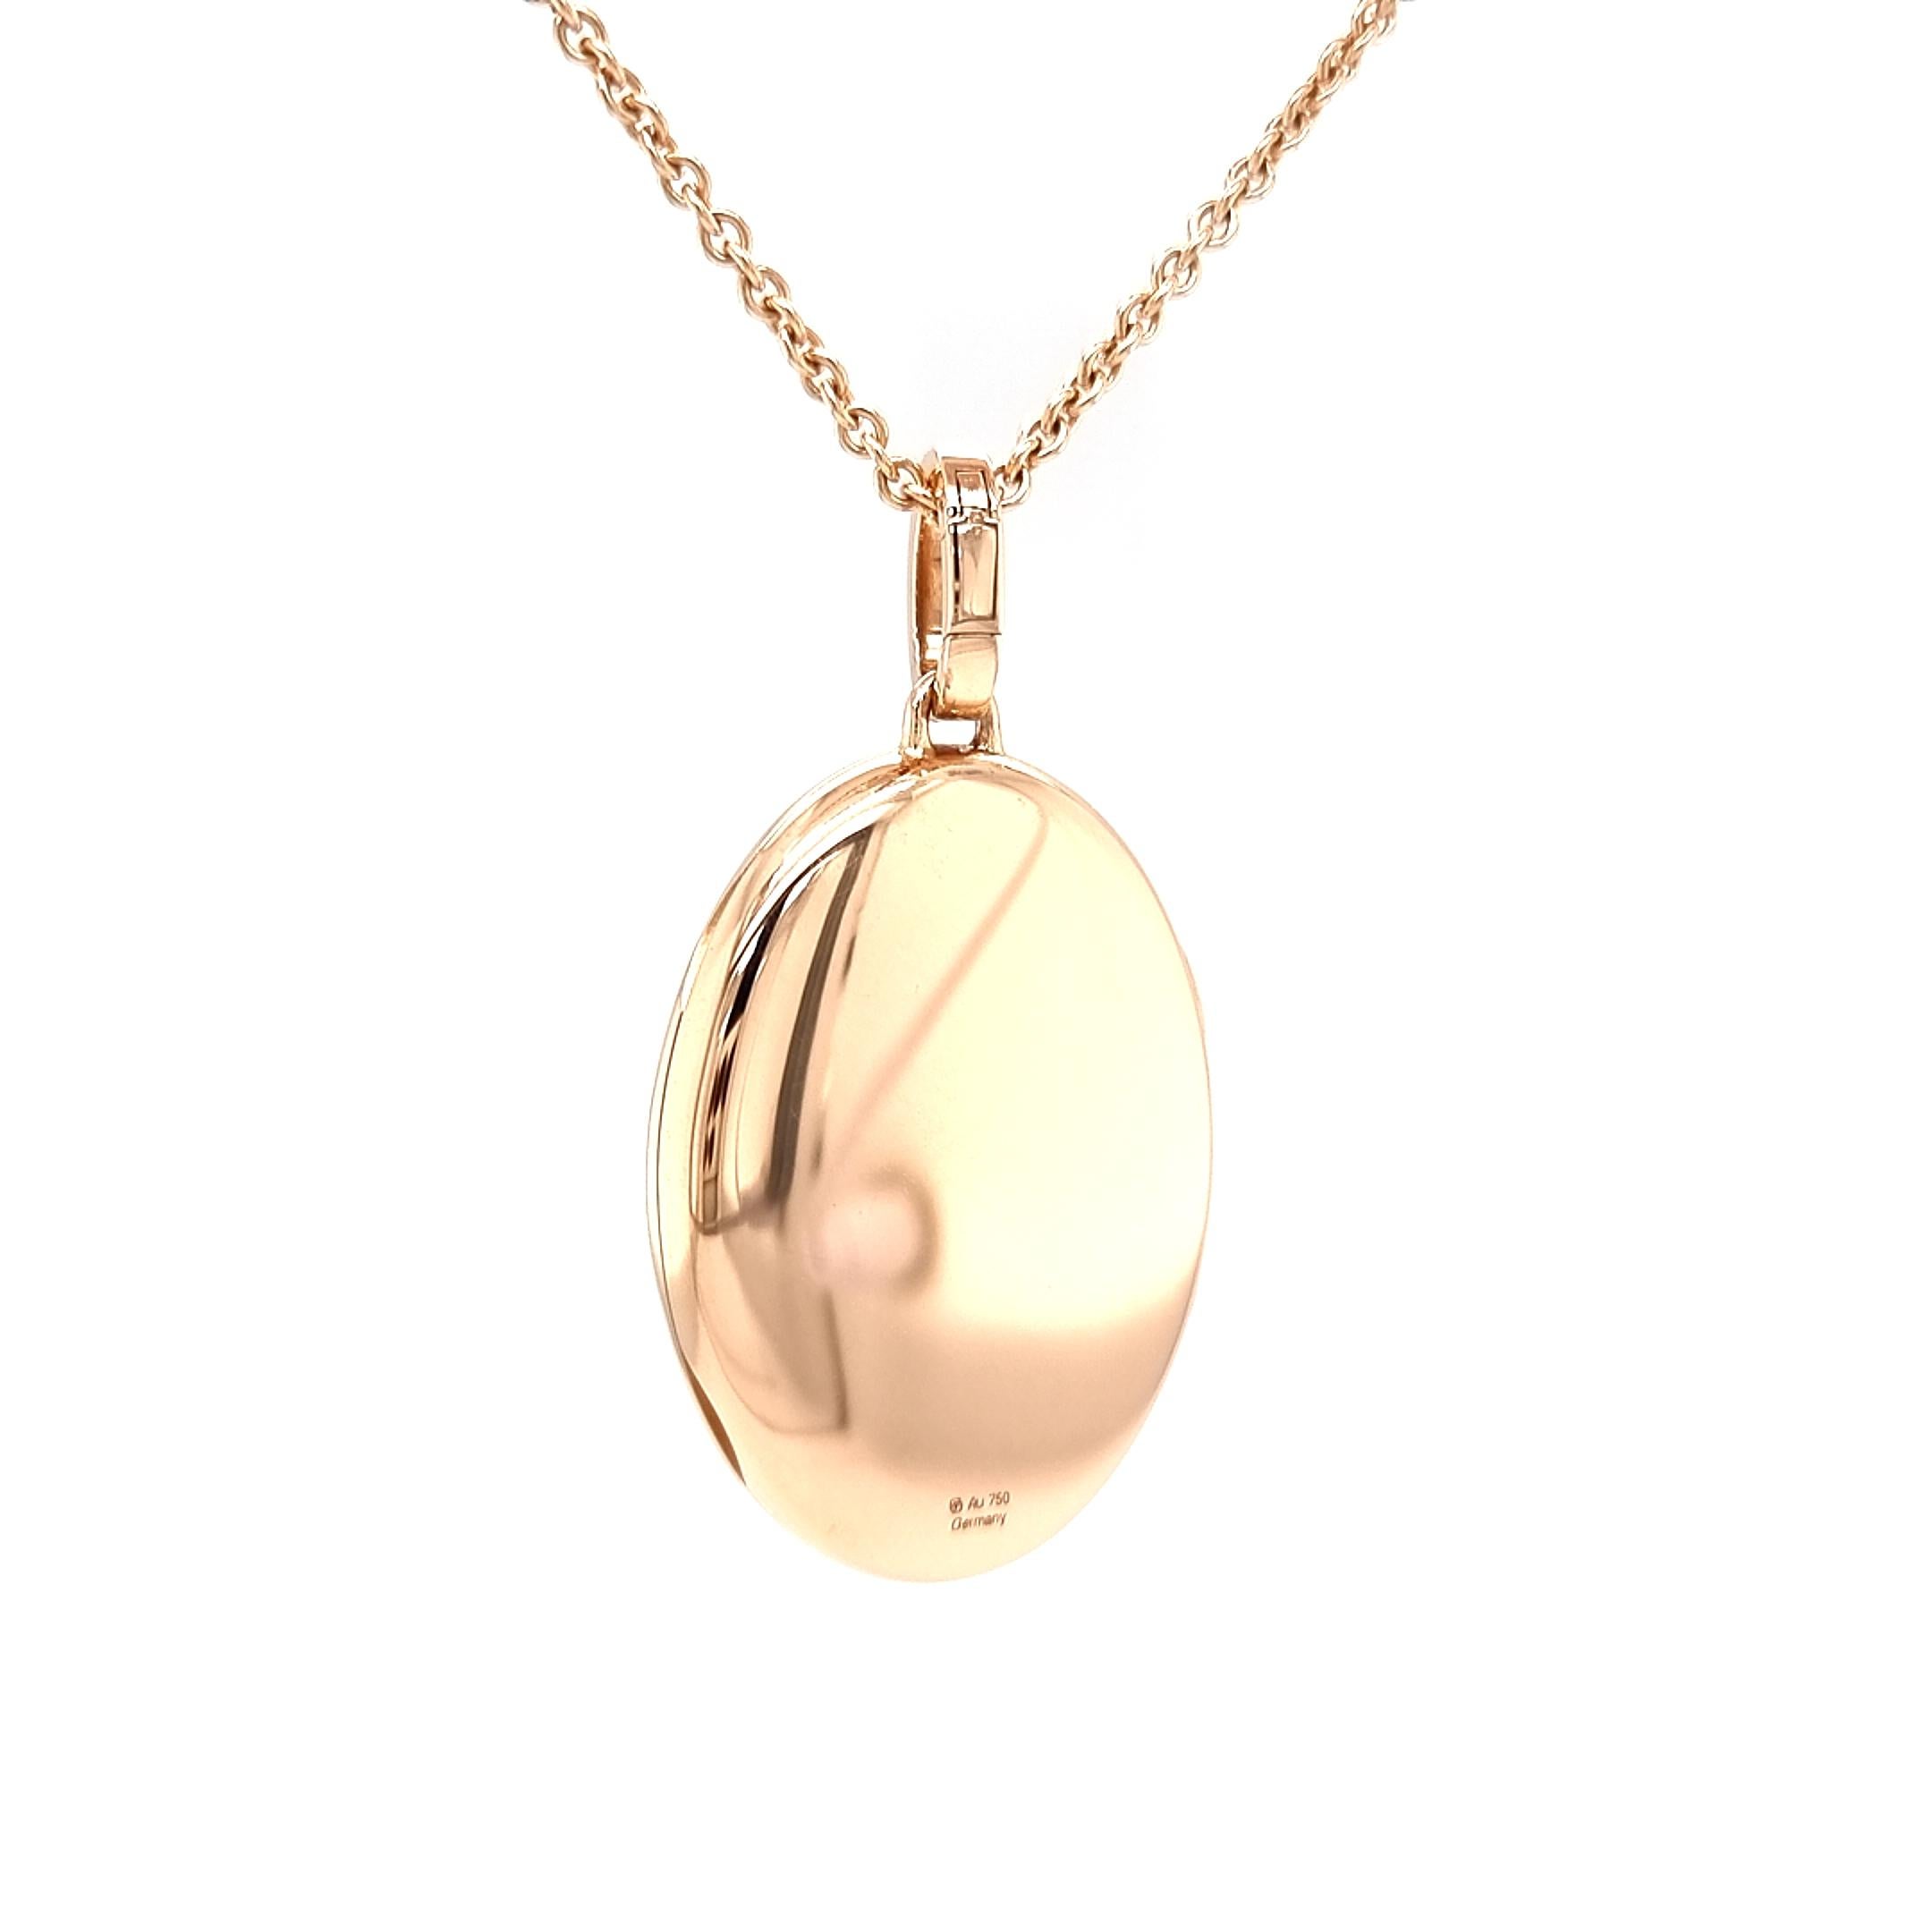 Customizable Oval Polished Pendant Locket - 18k Rose Gold - 23.0 mm x 32.0 mm For Sale 2